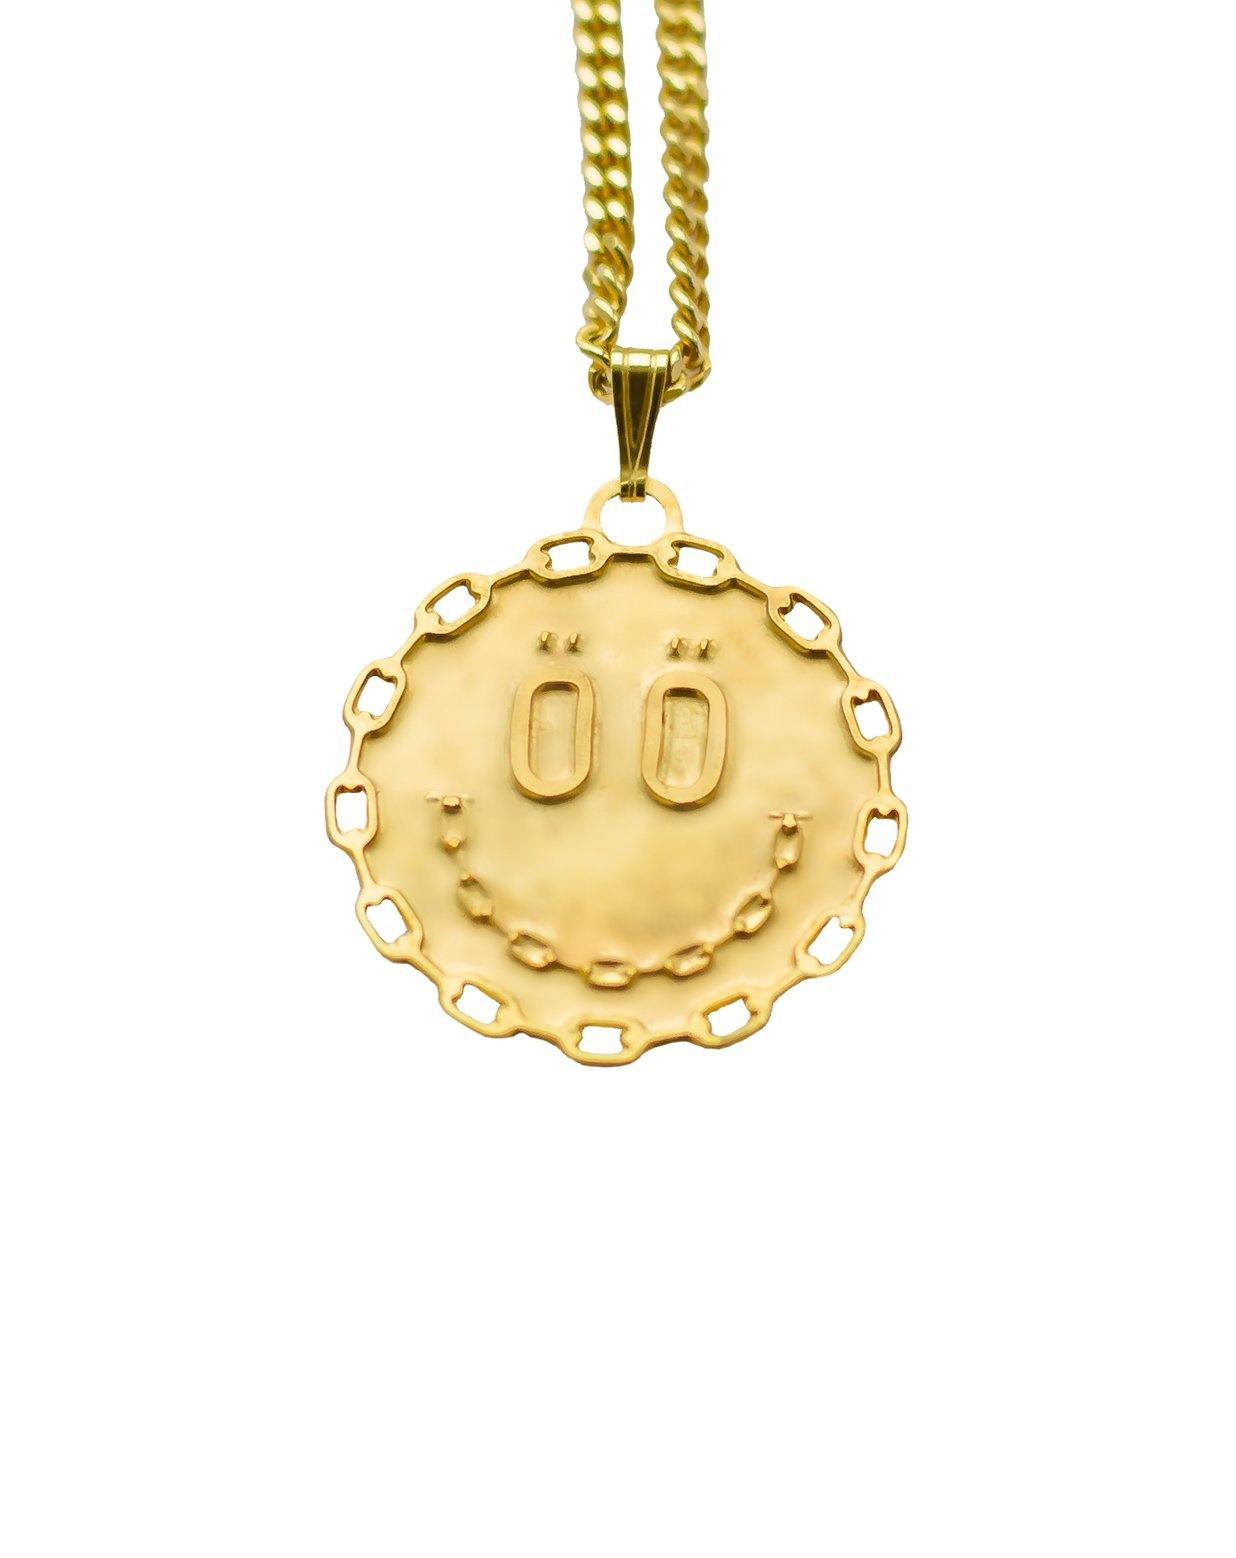 SMILE TODAY Medallion - Gold - Stööki - jewellery necklaces jewellers silver jewelryaddict goldplated jewelrygram accessories sterlingliver gold rings necklace chains necklaces pendants bling handcrafted